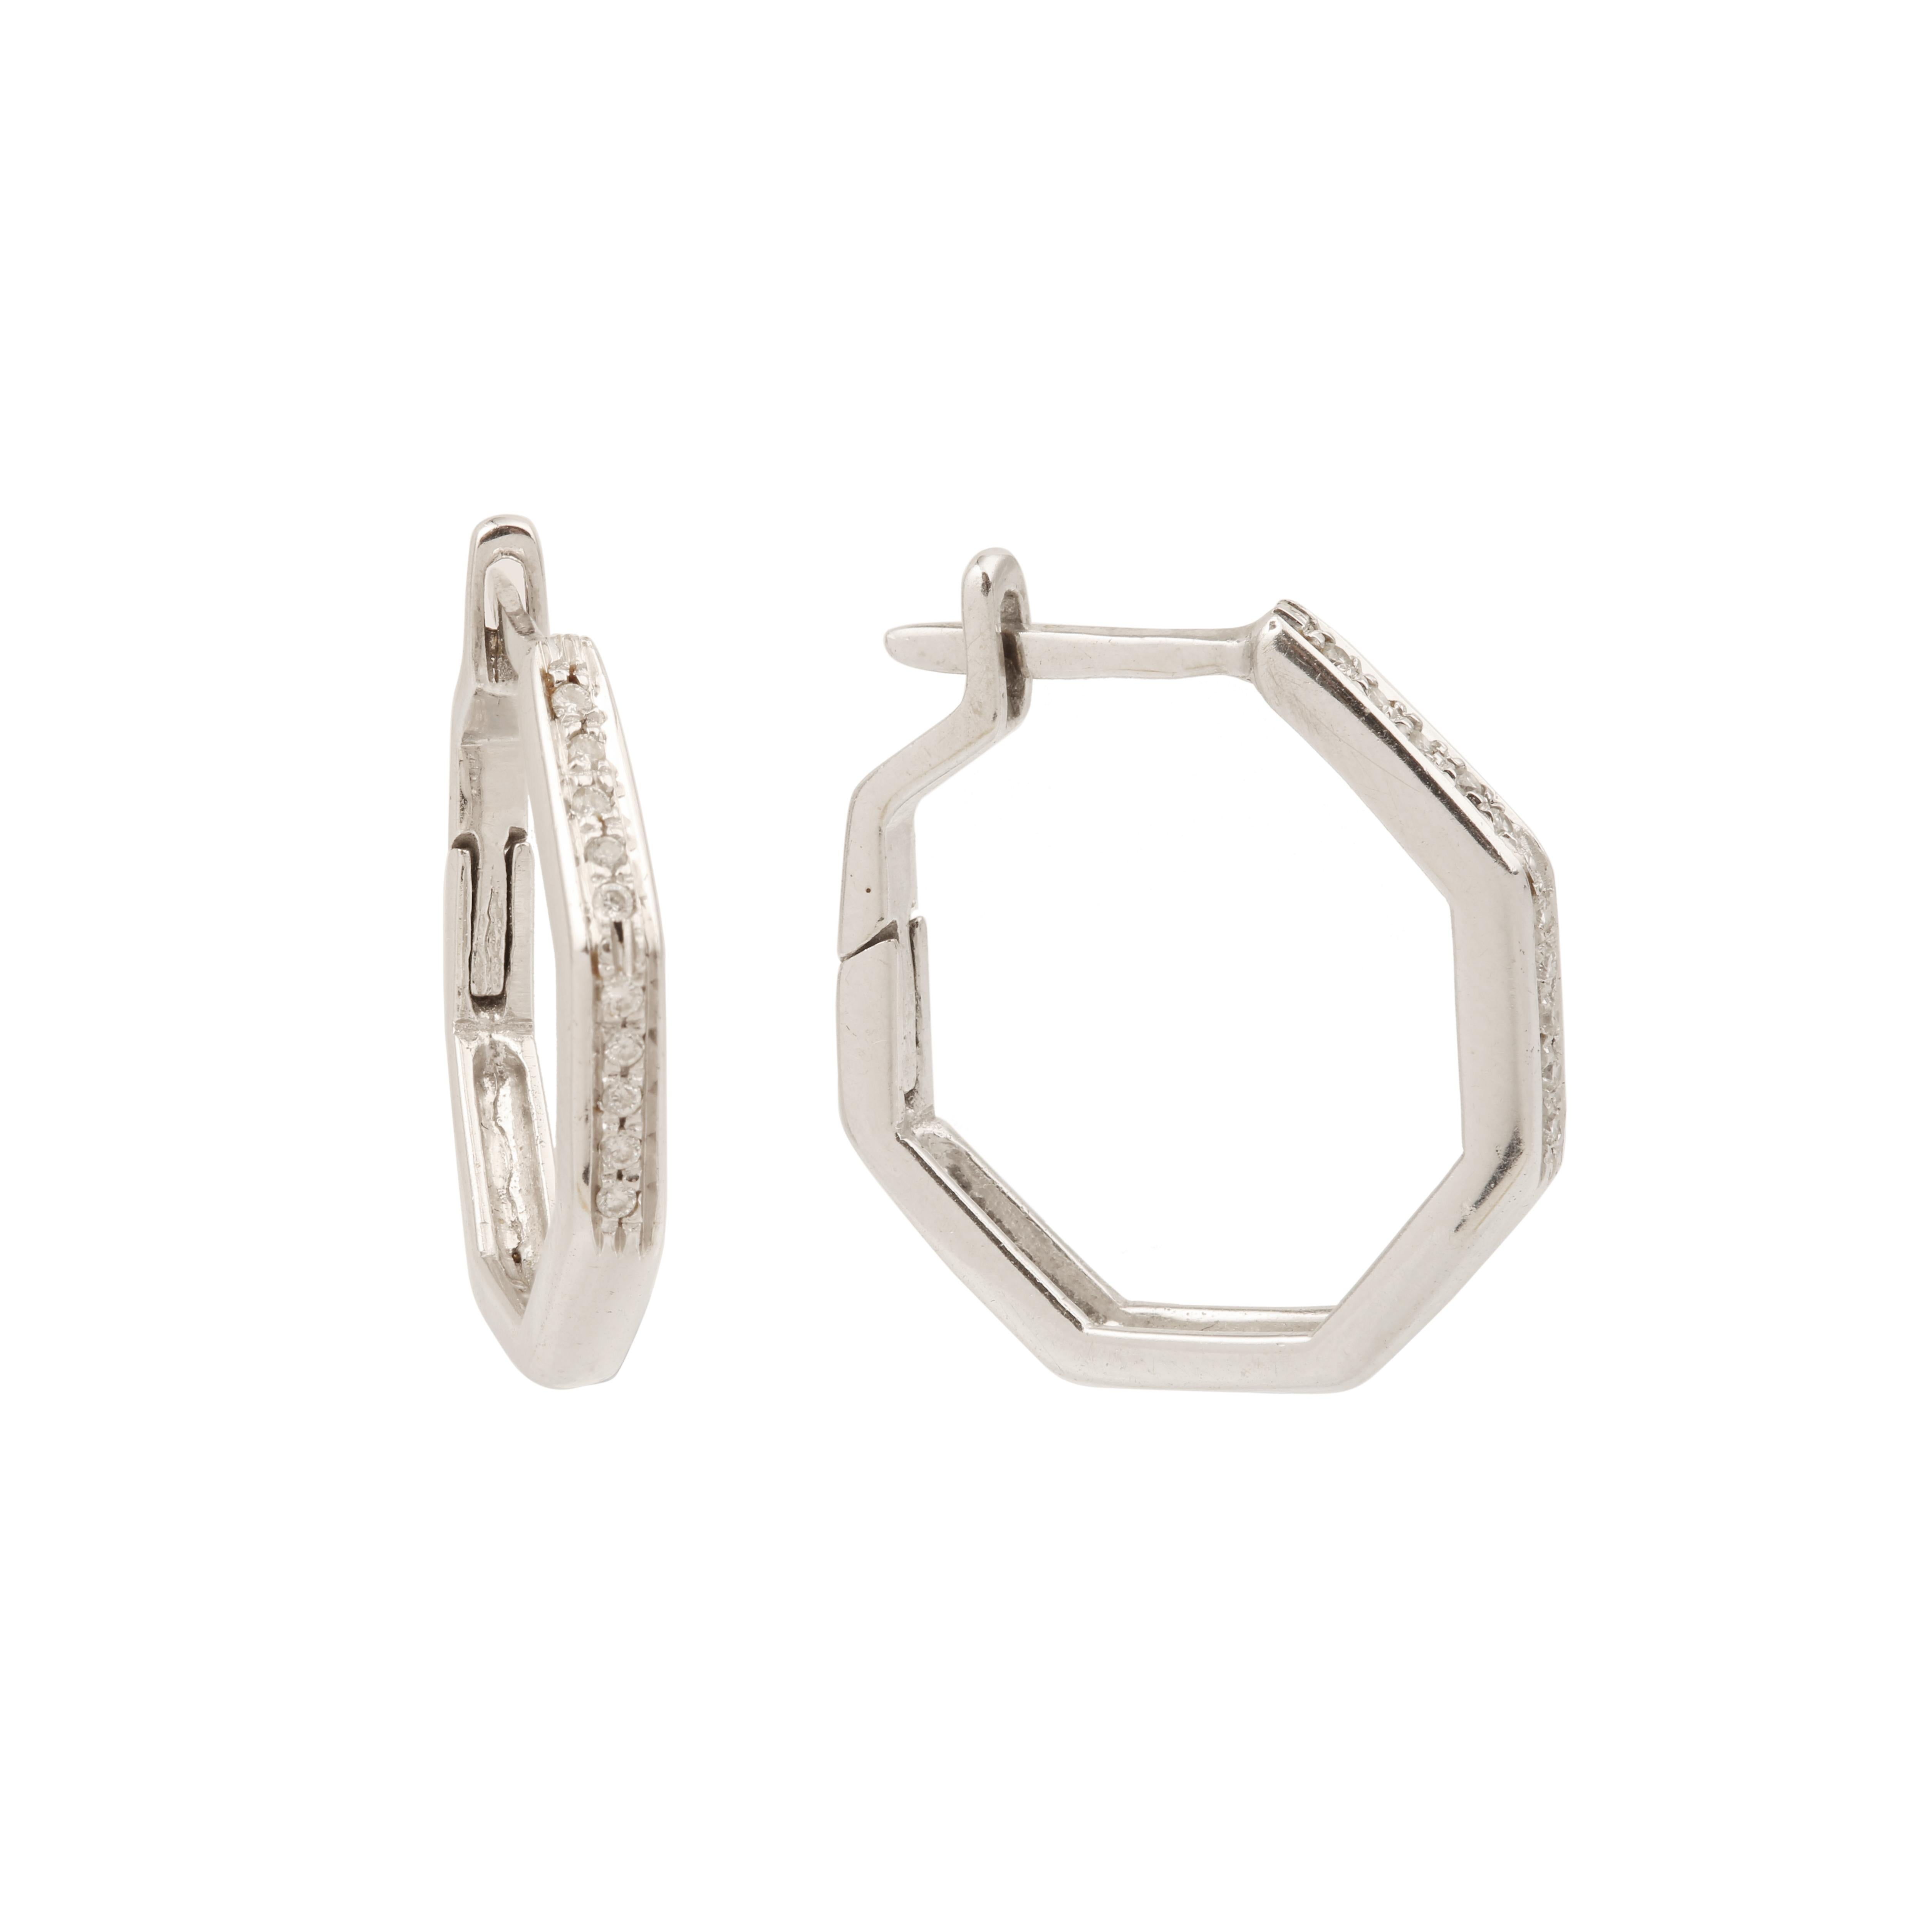 Pair of octagonal white gold hoop earrings set with diamonds.

Total estimated diamond weight: 0.20 carats

Dimensions : 20.37 x 20.37 x 2.67 mm (0.802 x 0.802 x 0.105 inch)

Total creole weight: 5.5 g

French work circa 2000

18-carat white gold,